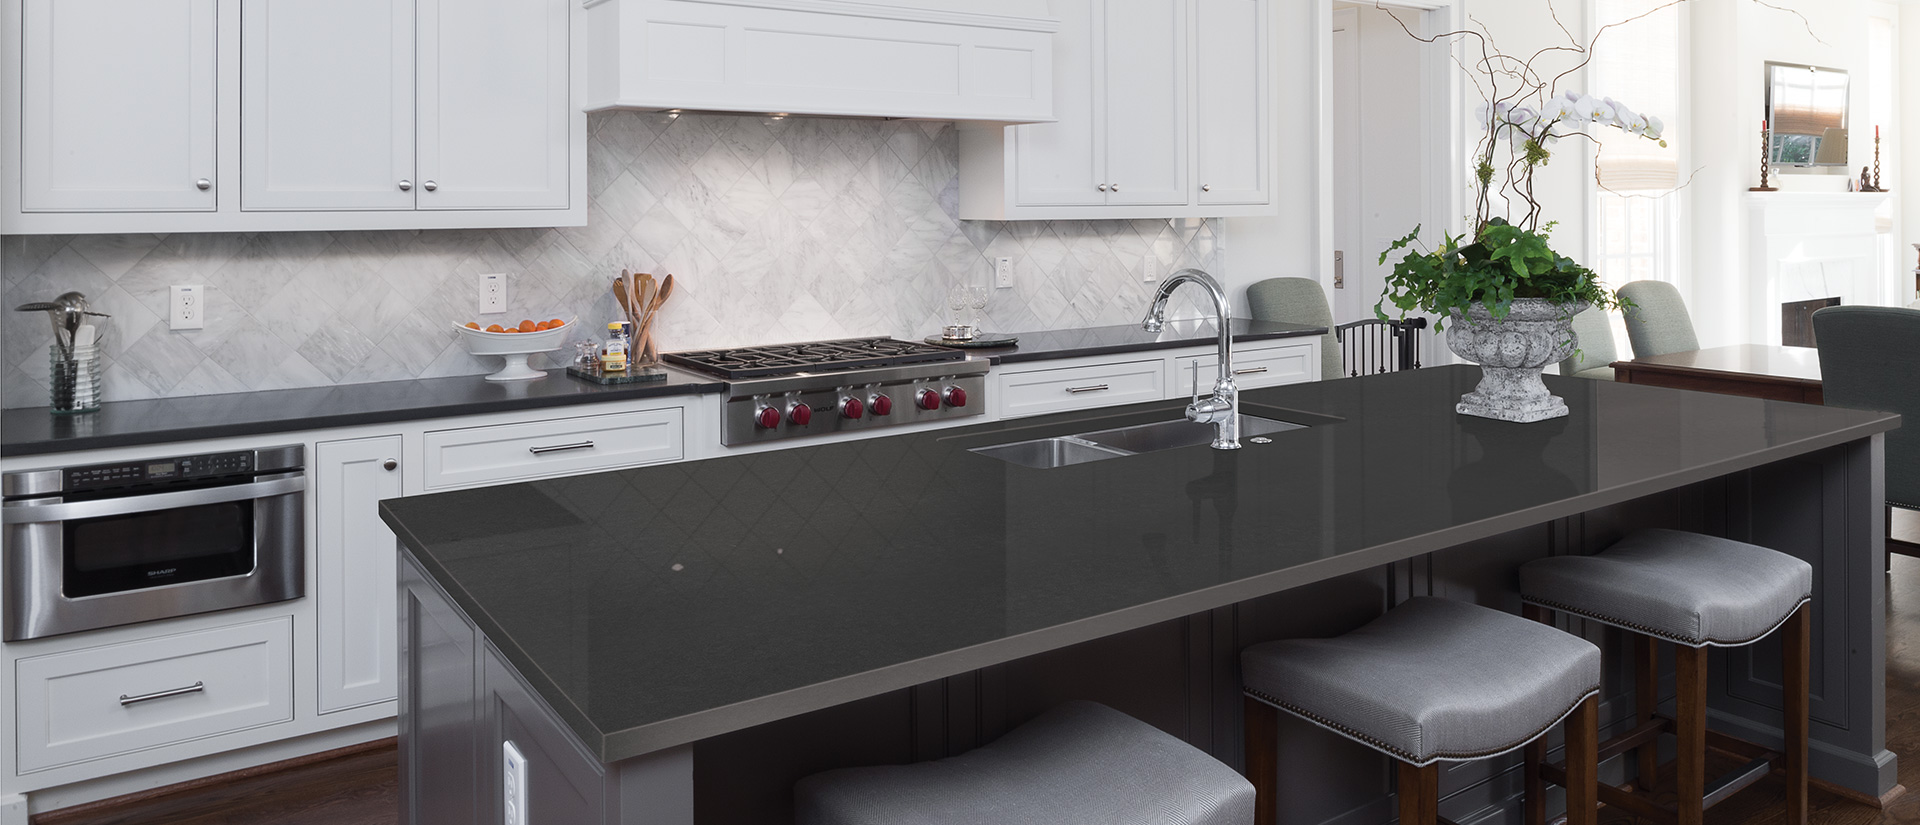 Shadow Gray Quartz countertop in a cozy and intimate kitchen